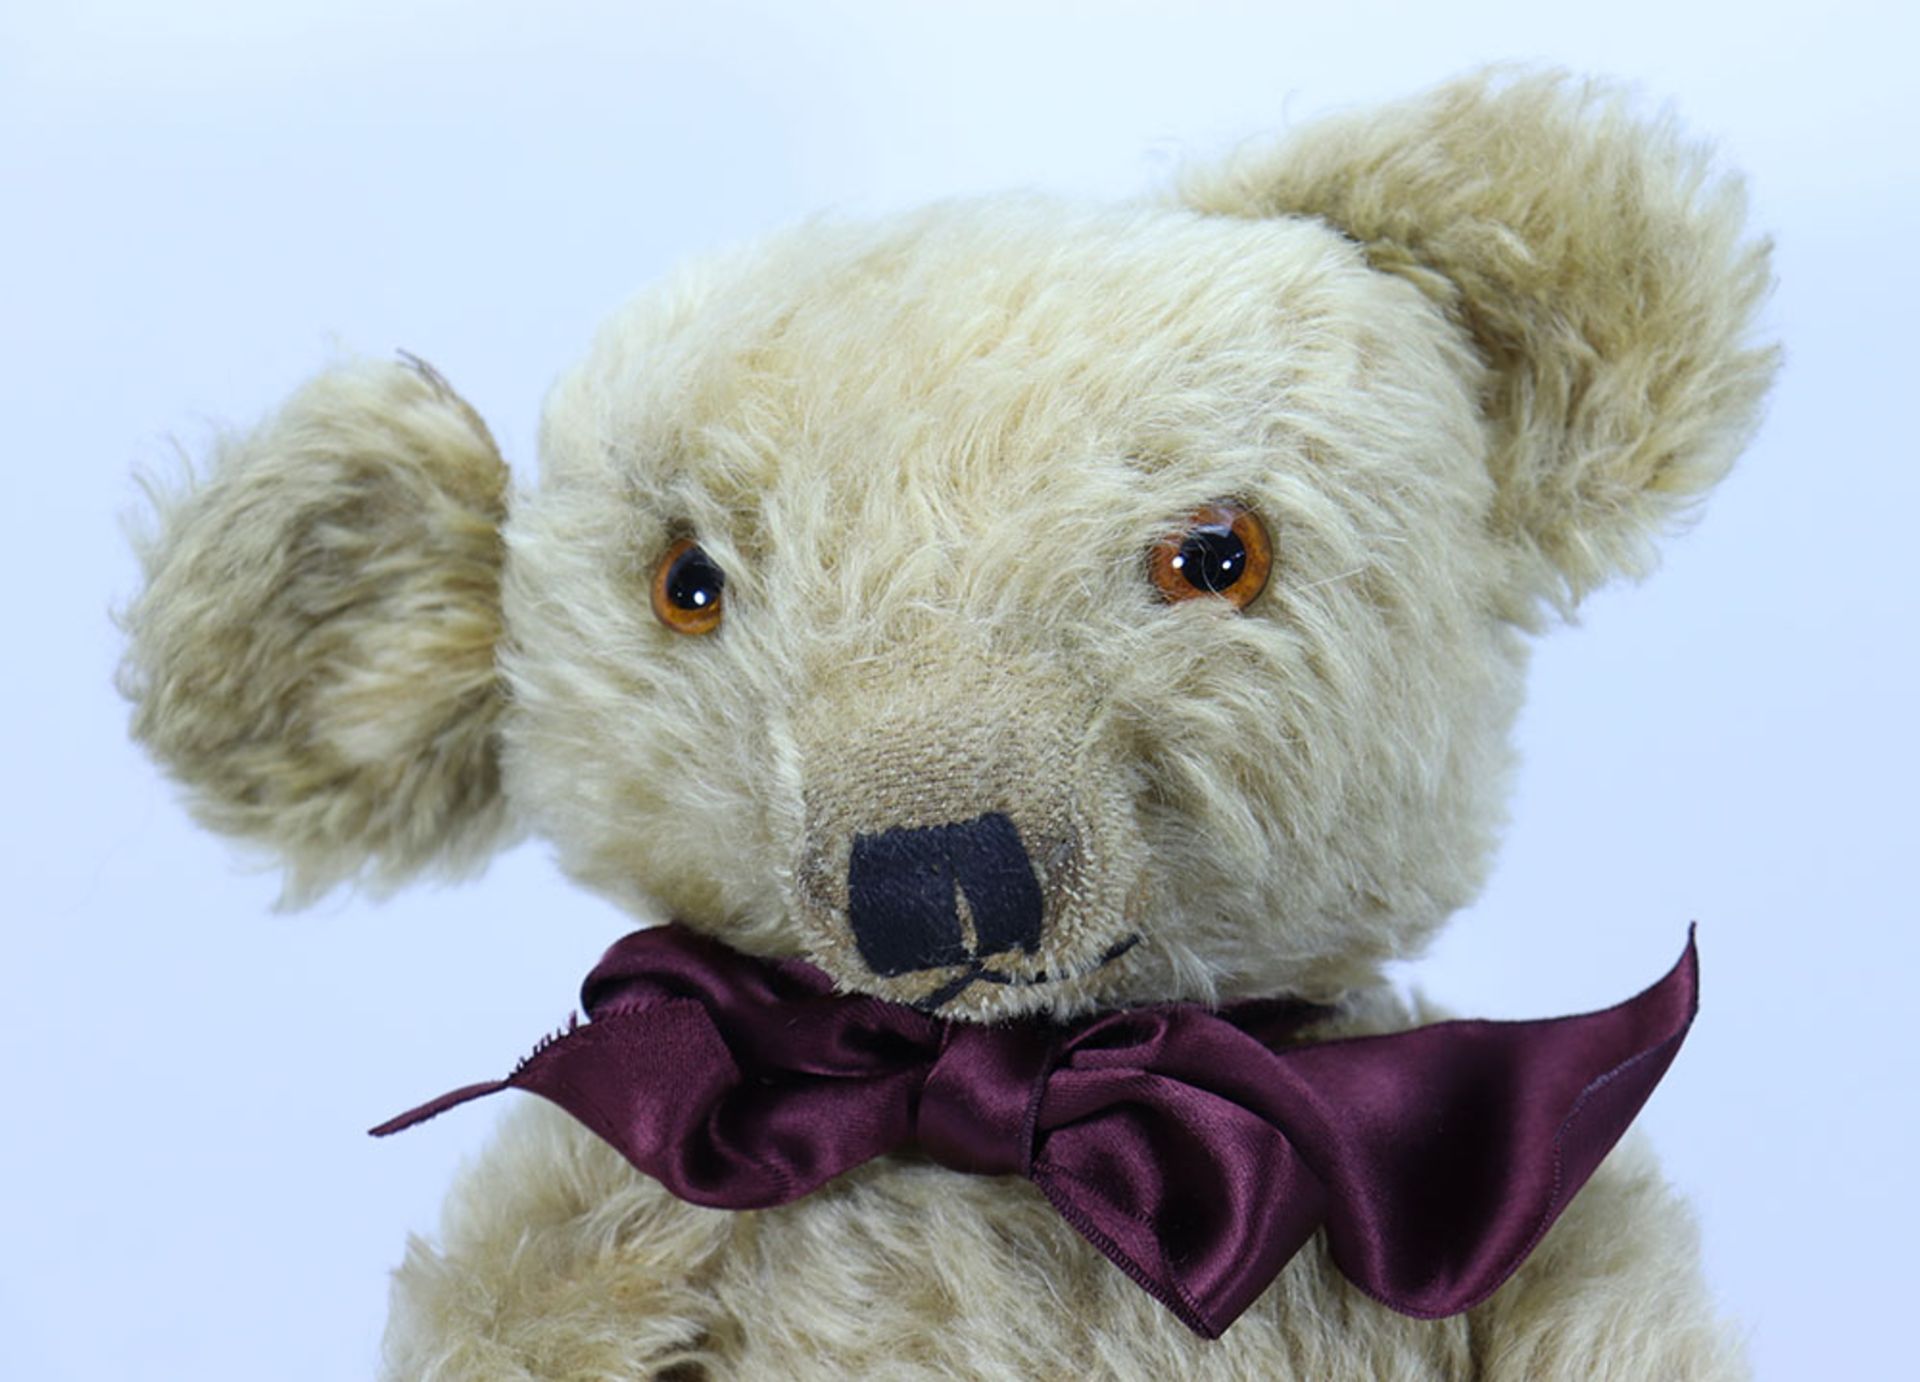 A Merrythought Teddy bear, English 1930s, - Image 2 of 3